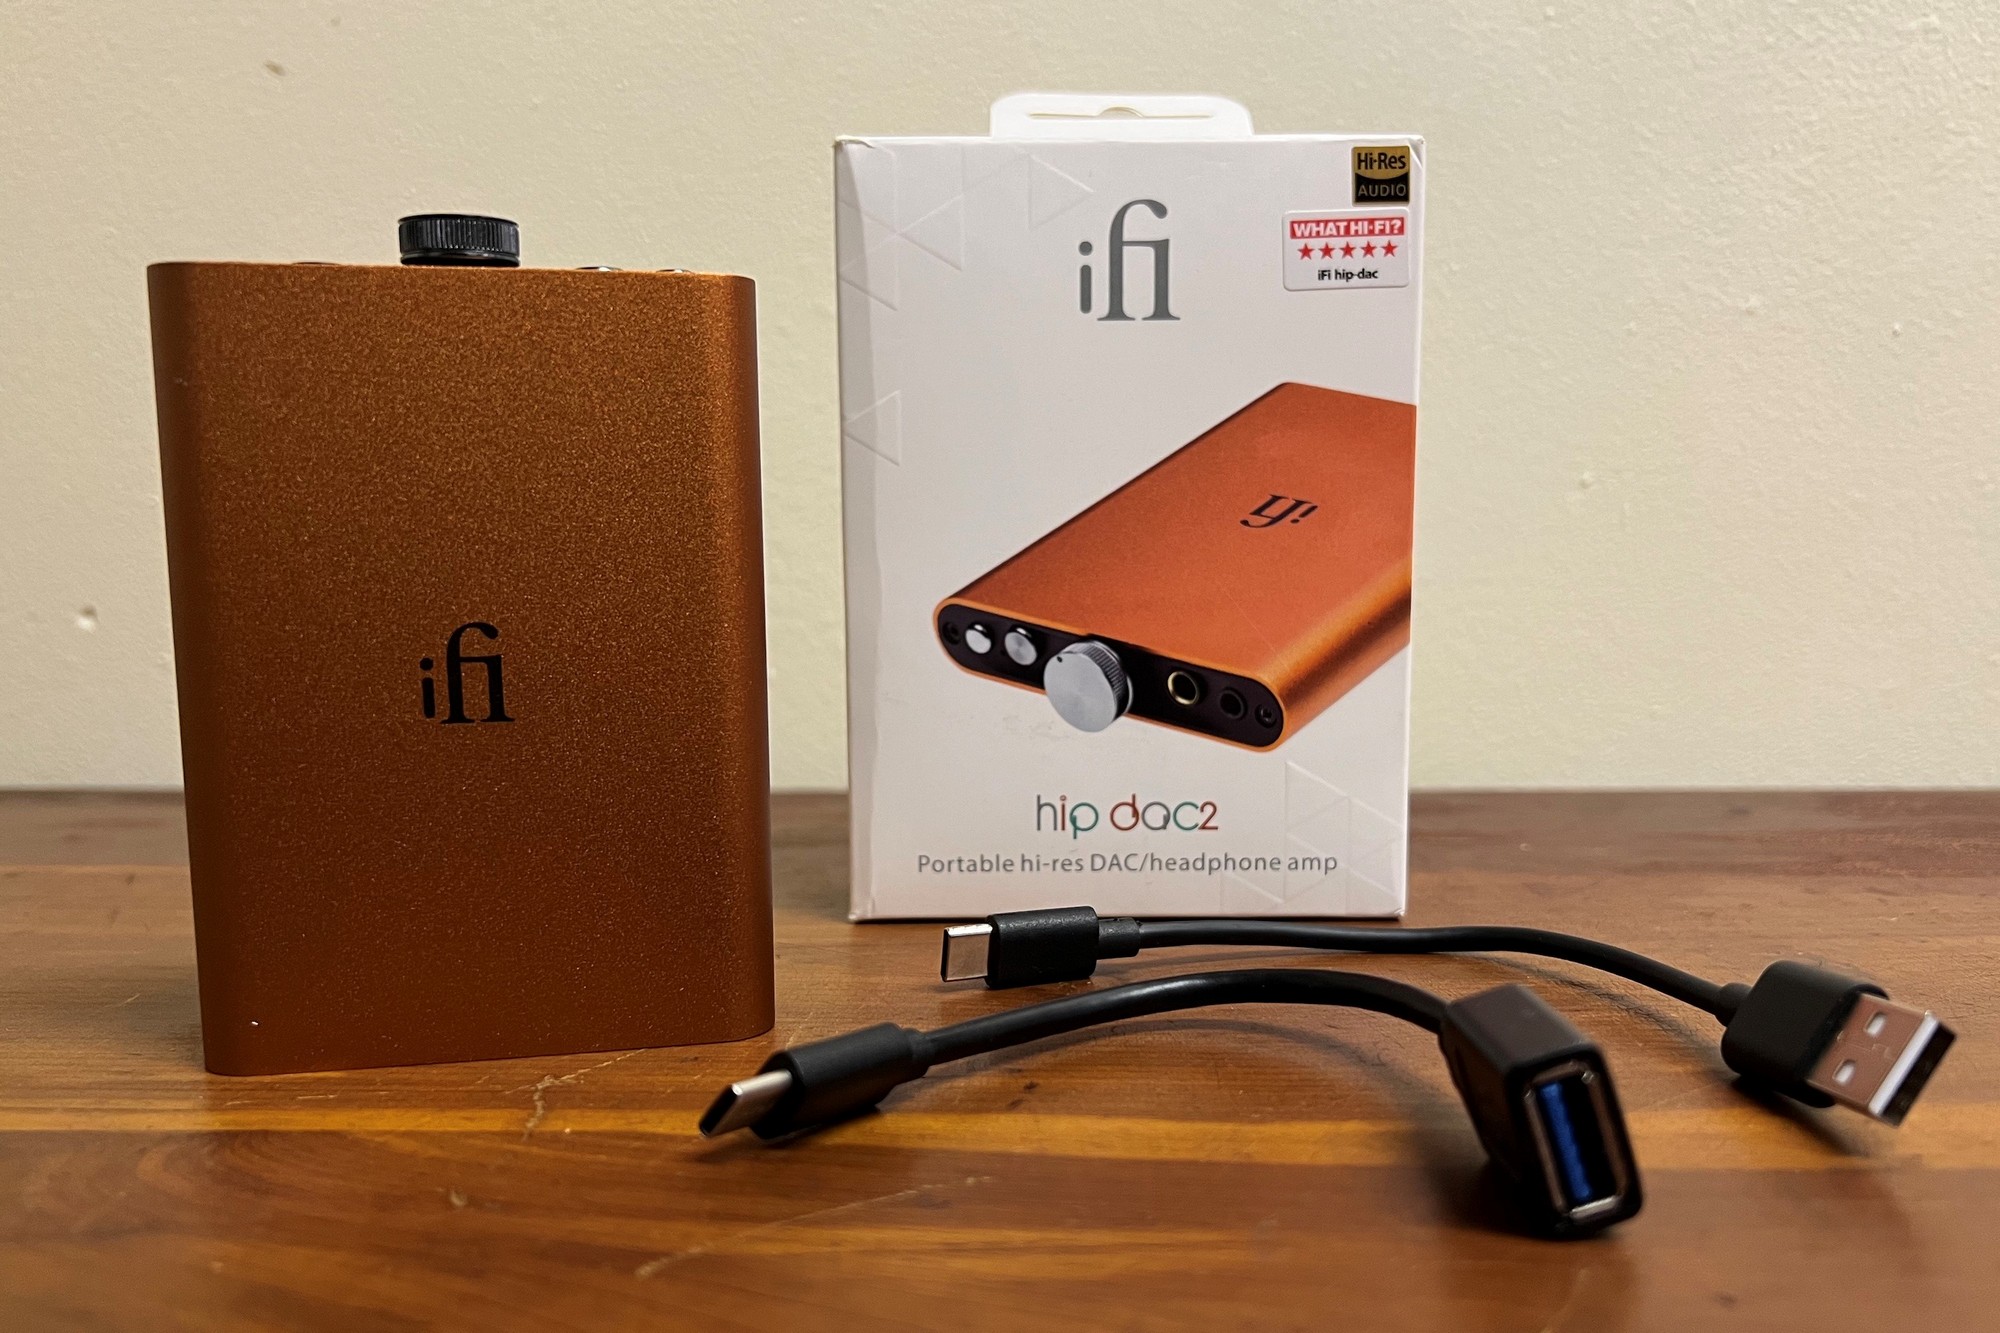 hip dac 2 gold edition by iFi audio   Superior sonics now come in gold